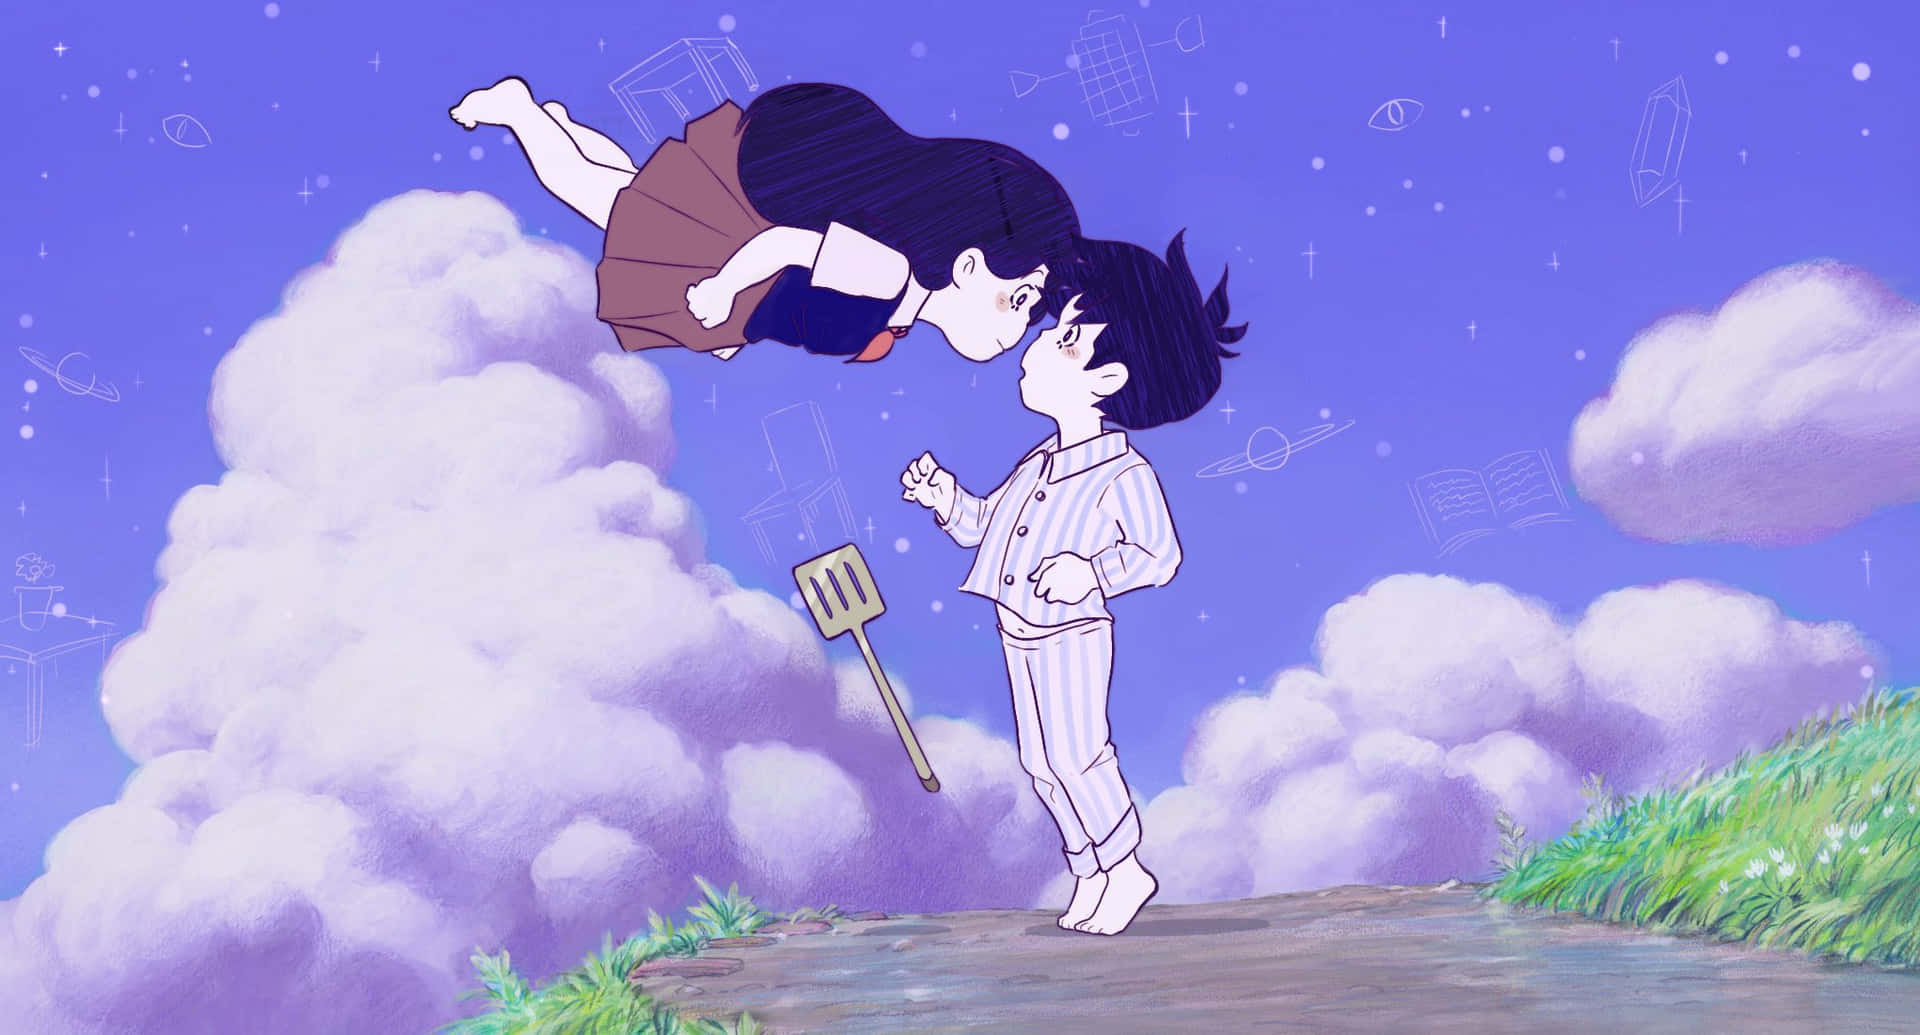 Explore the stunning and surreal world of Omori